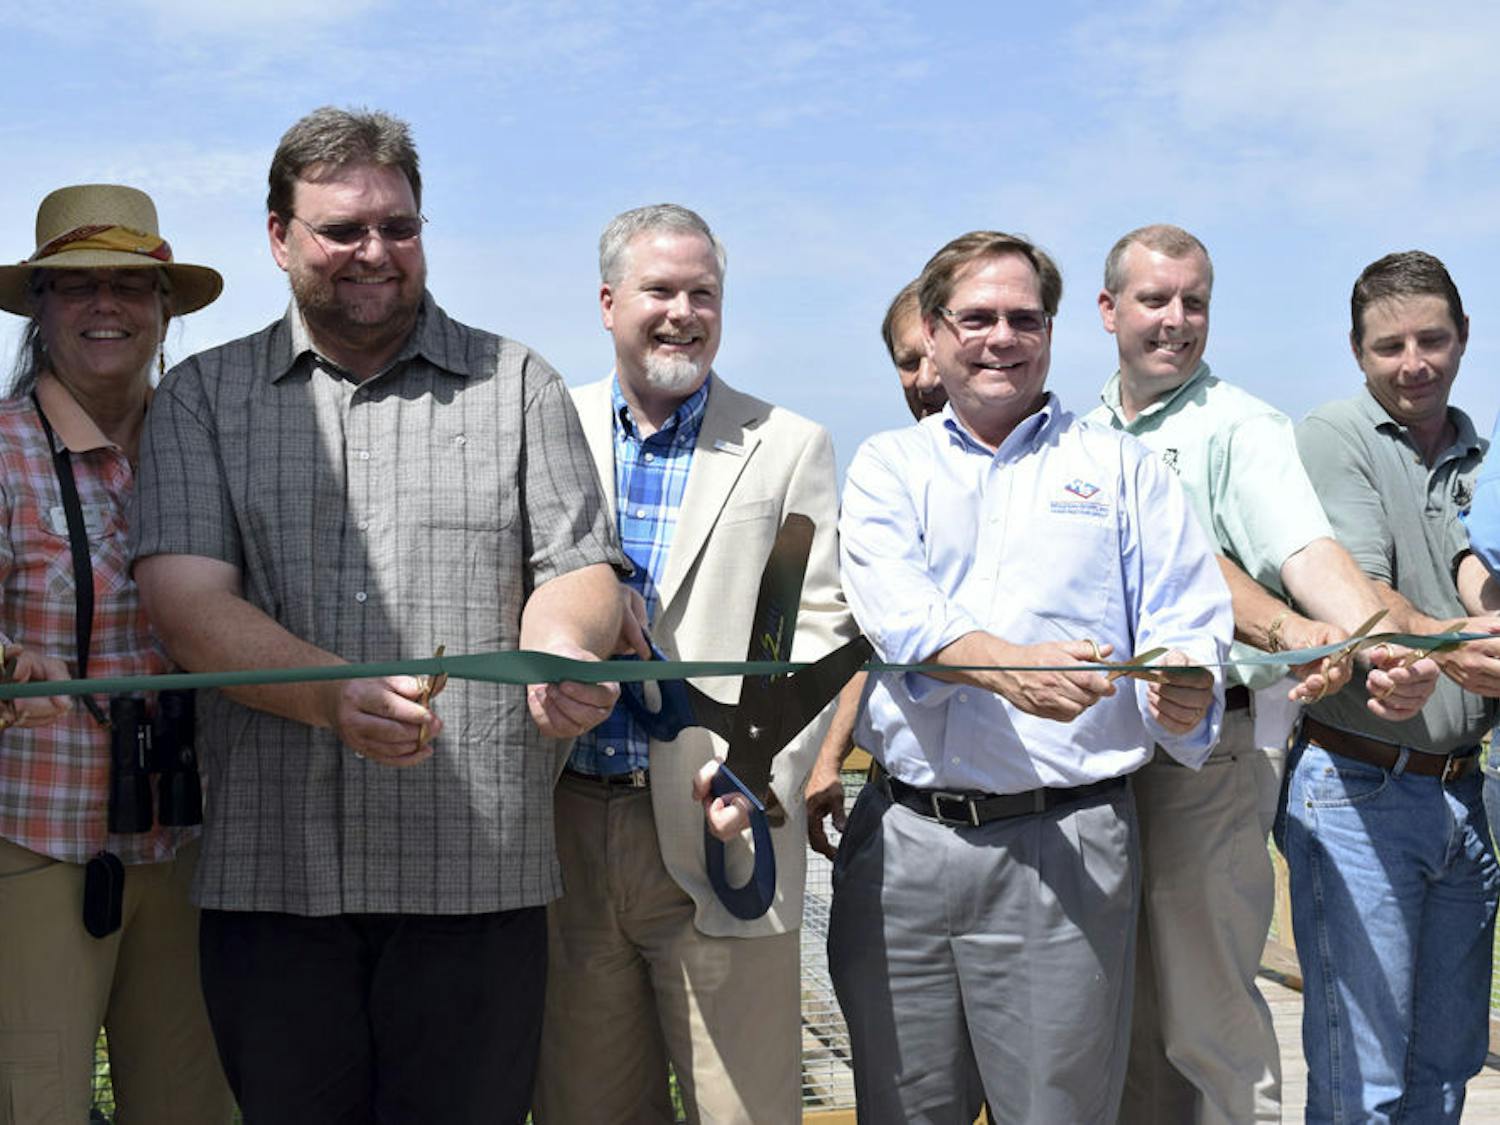 From left: Helen Warren, City Commissioner; Brad Purcell, South Florida Water Management District; Ed Braddy, Mayor; David Lewis, Wharton Smith; Chris Wynn, Florida Fish and Wildlife; Chris Keller, Wetland Solutions; and Tom Frick, FDEP, cut the ribbon at Friday's grand opening of Sweetwater Wetlands Park, located at 325 SW Williston Road.